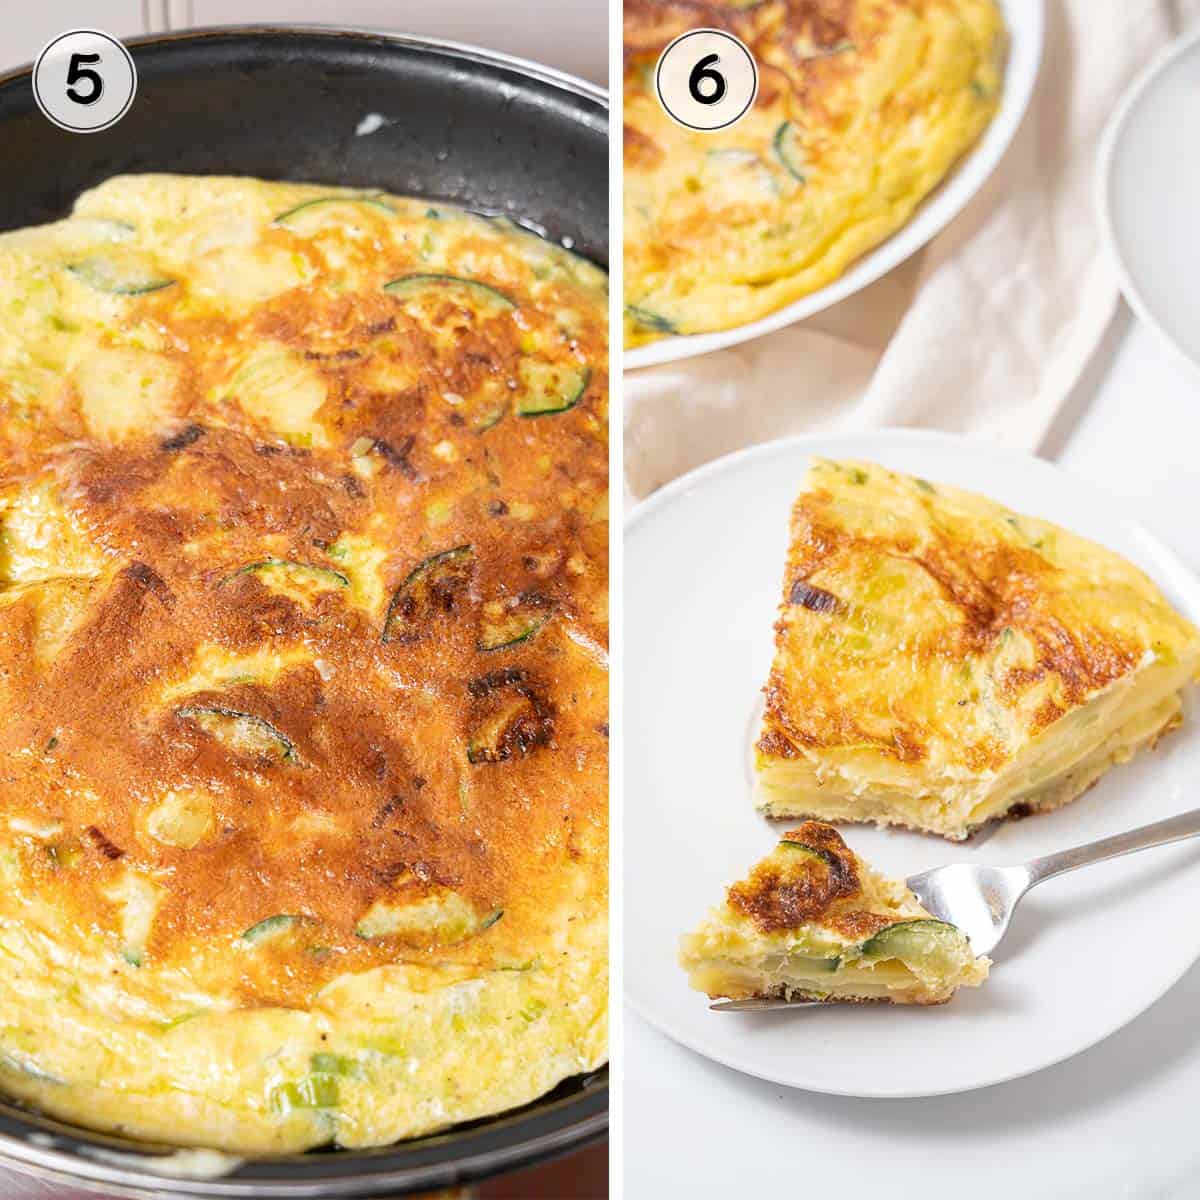 cooking the Spanish tortilla and serving in slices.